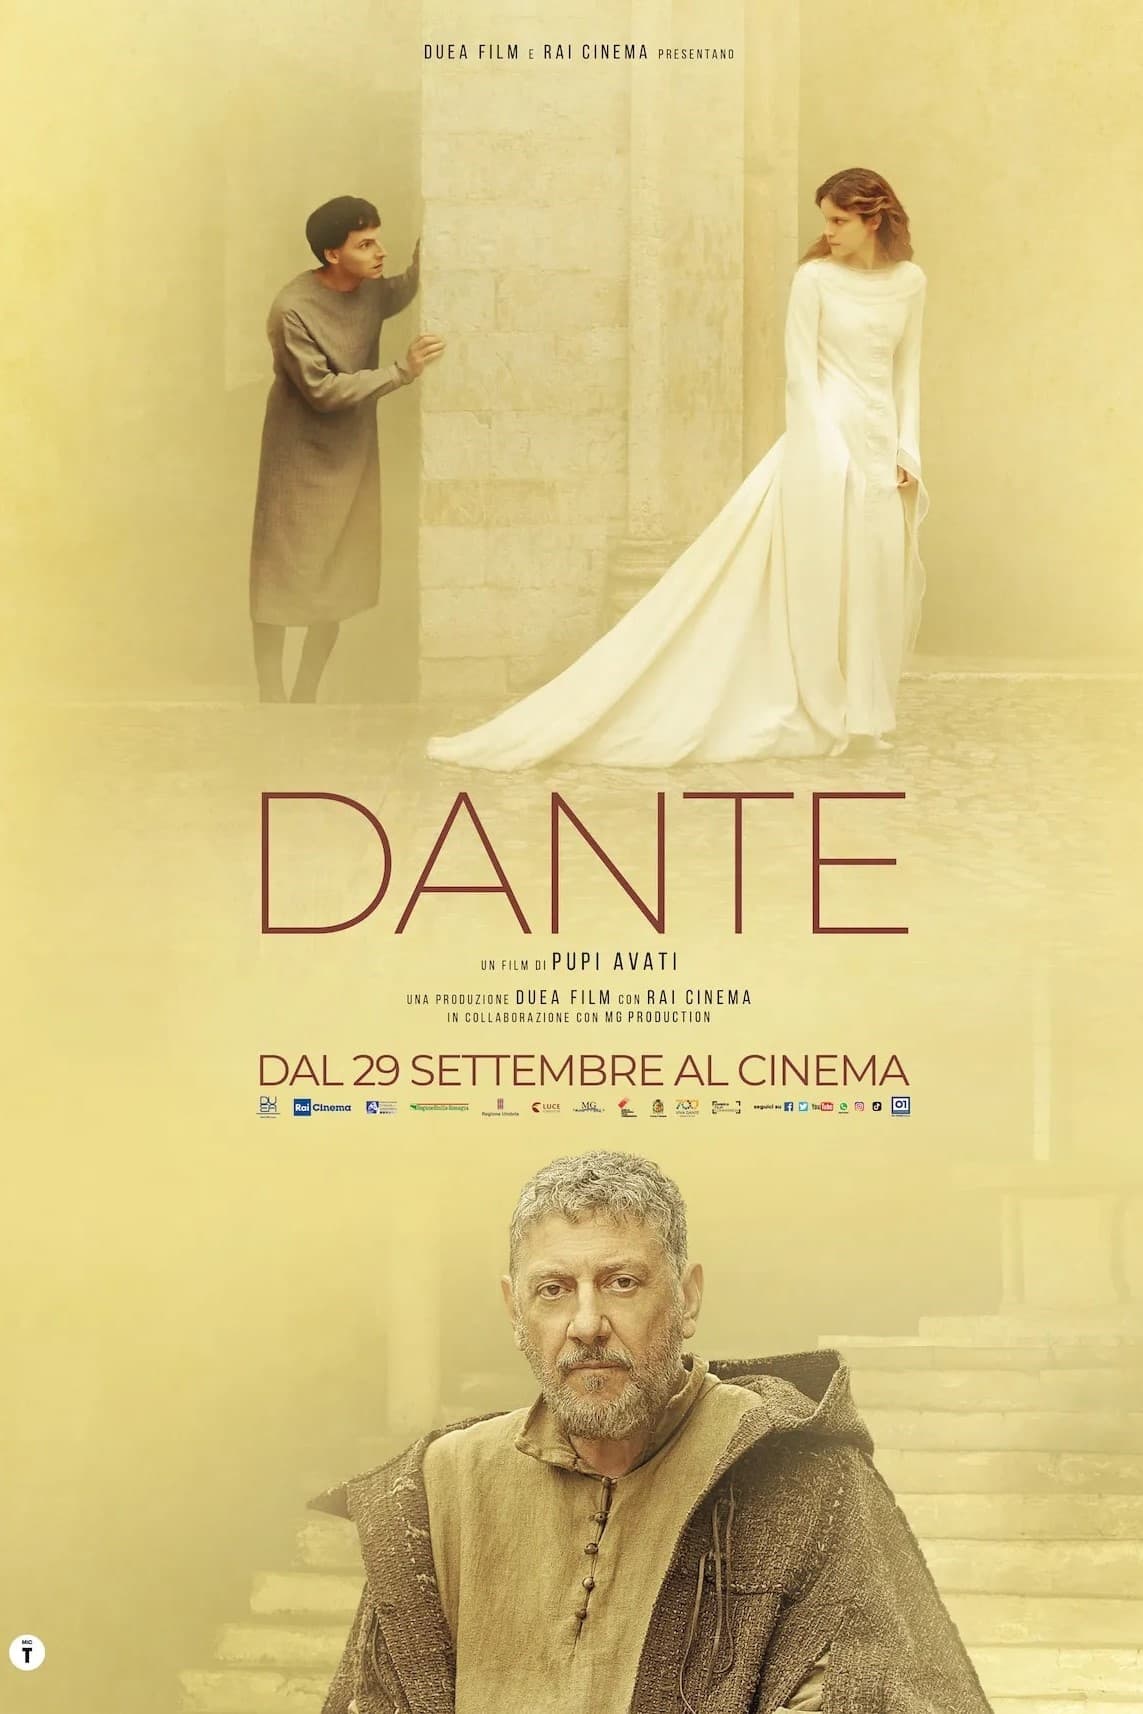 Poster for the movie "Dante"